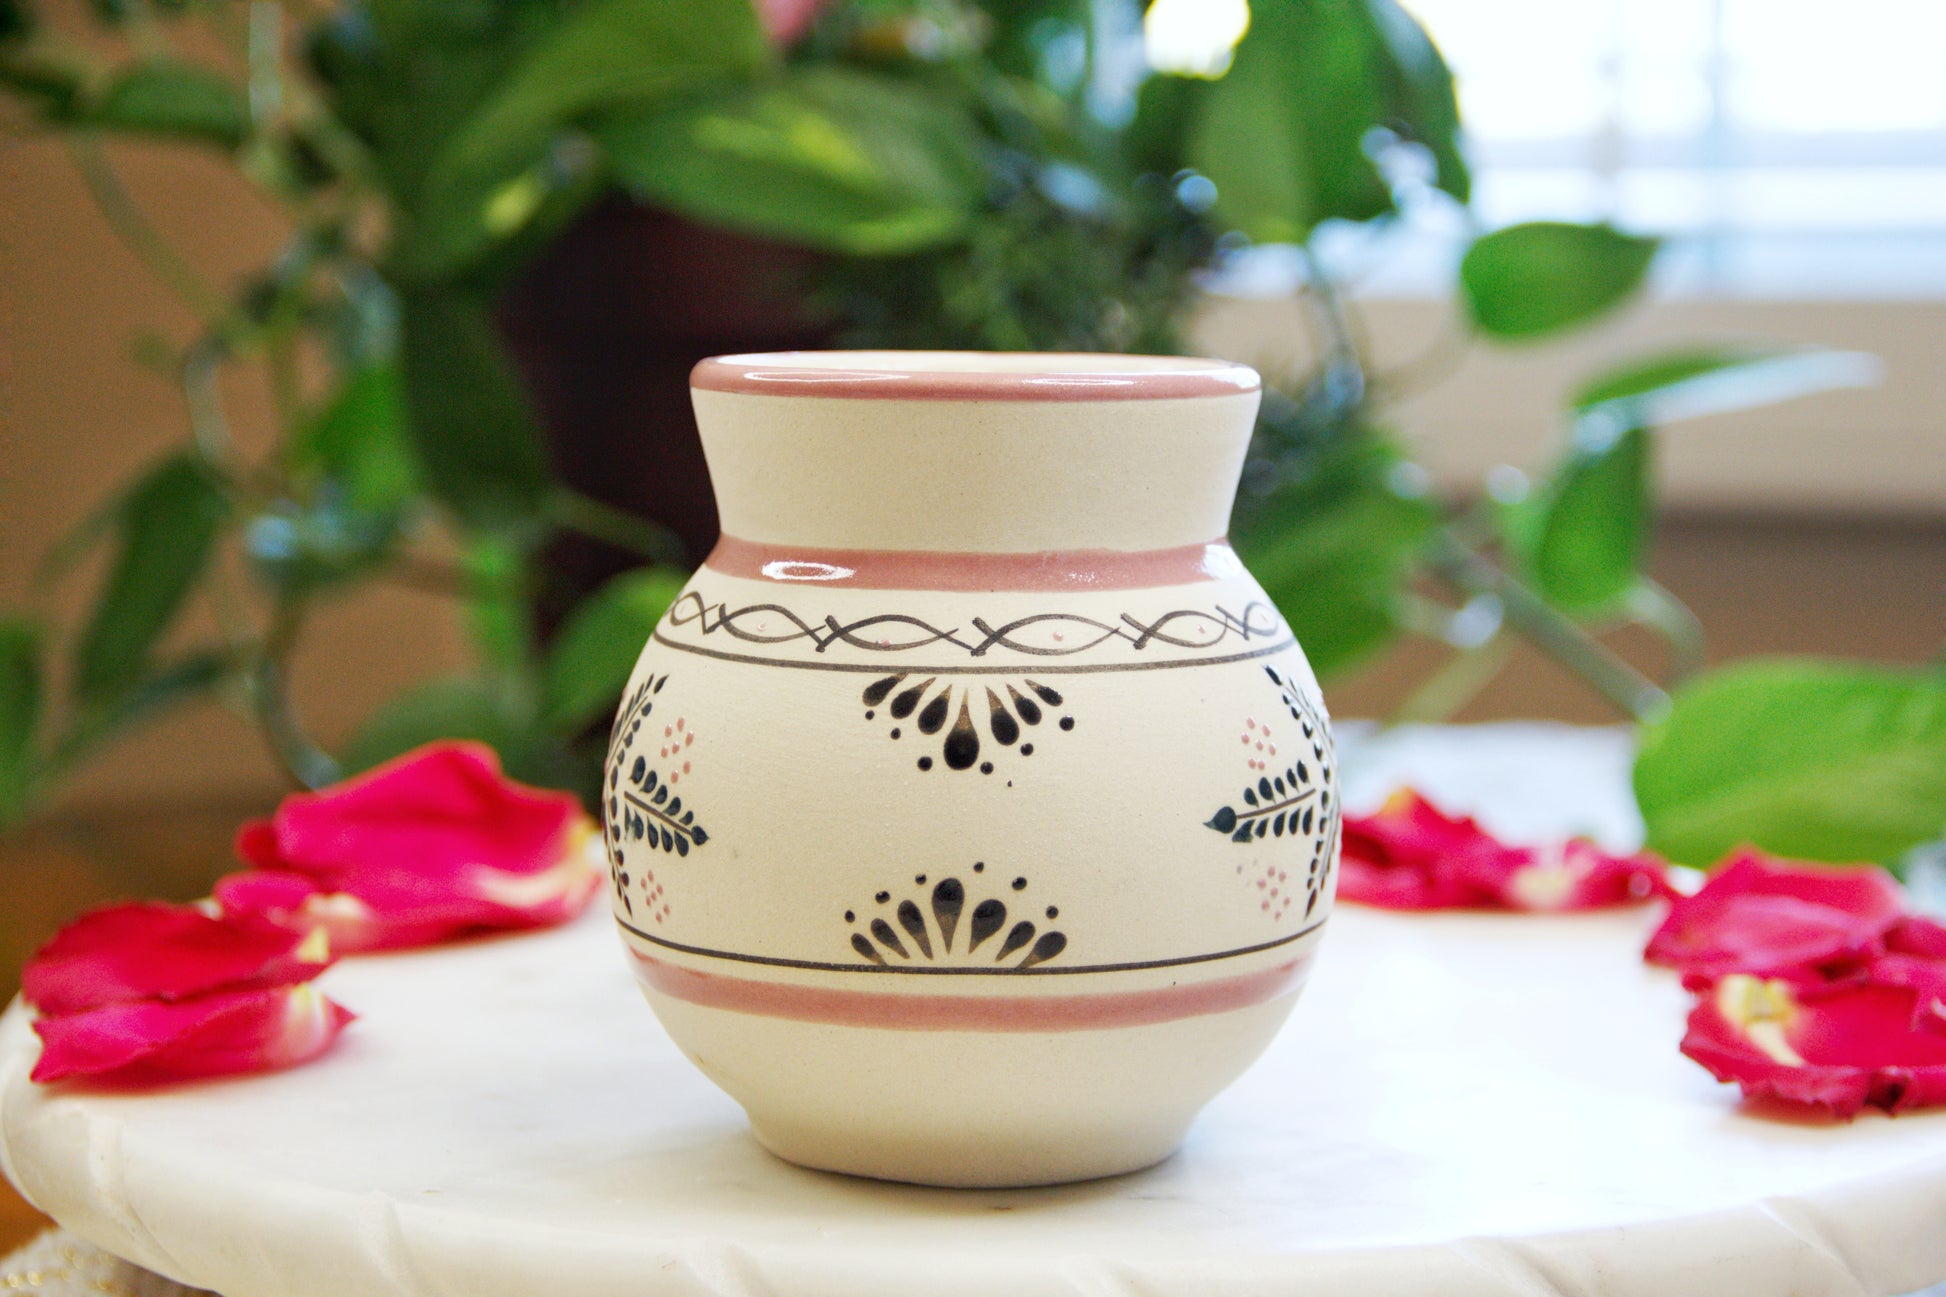 side view of a handmade artisanal candle in a red floral design mug. Custom made by Artisan in Mexico. 100% All Natural Soy Candle. Reuse the talavera as home decor or storage